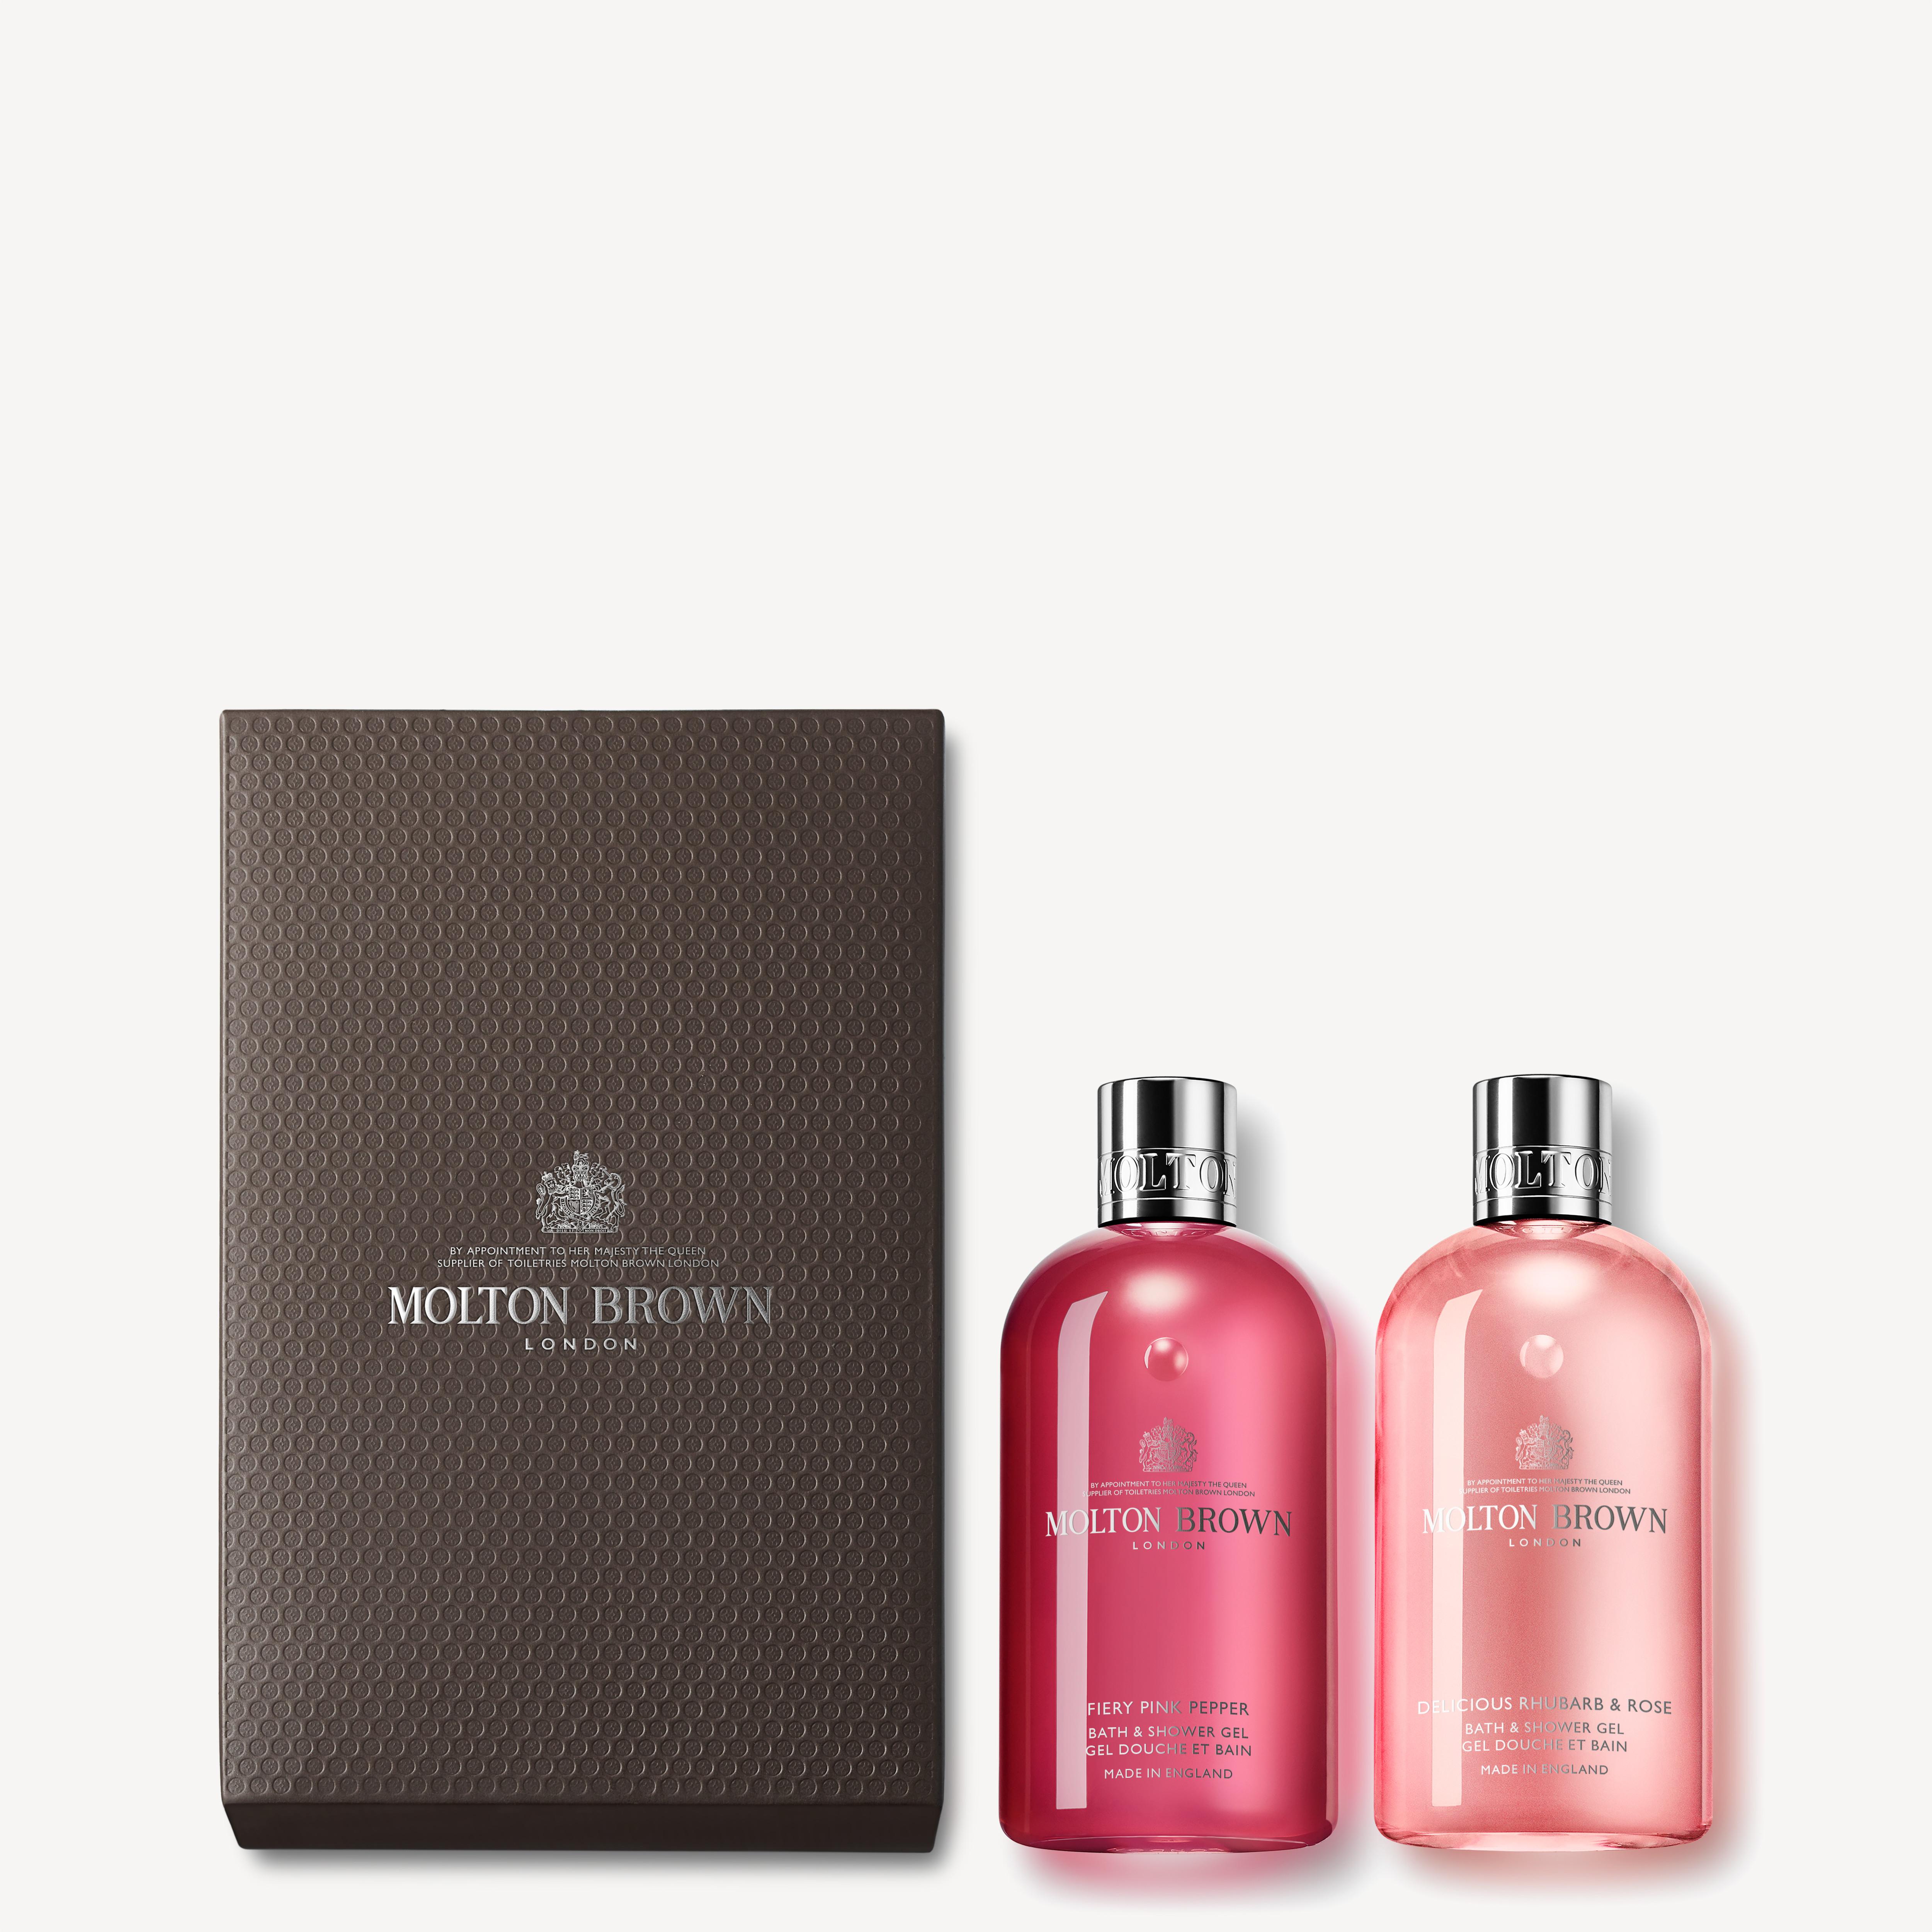 Molton Brown Fiery Pink Pepper & Delicious Rhubarb & Rose Bathing Gift Set